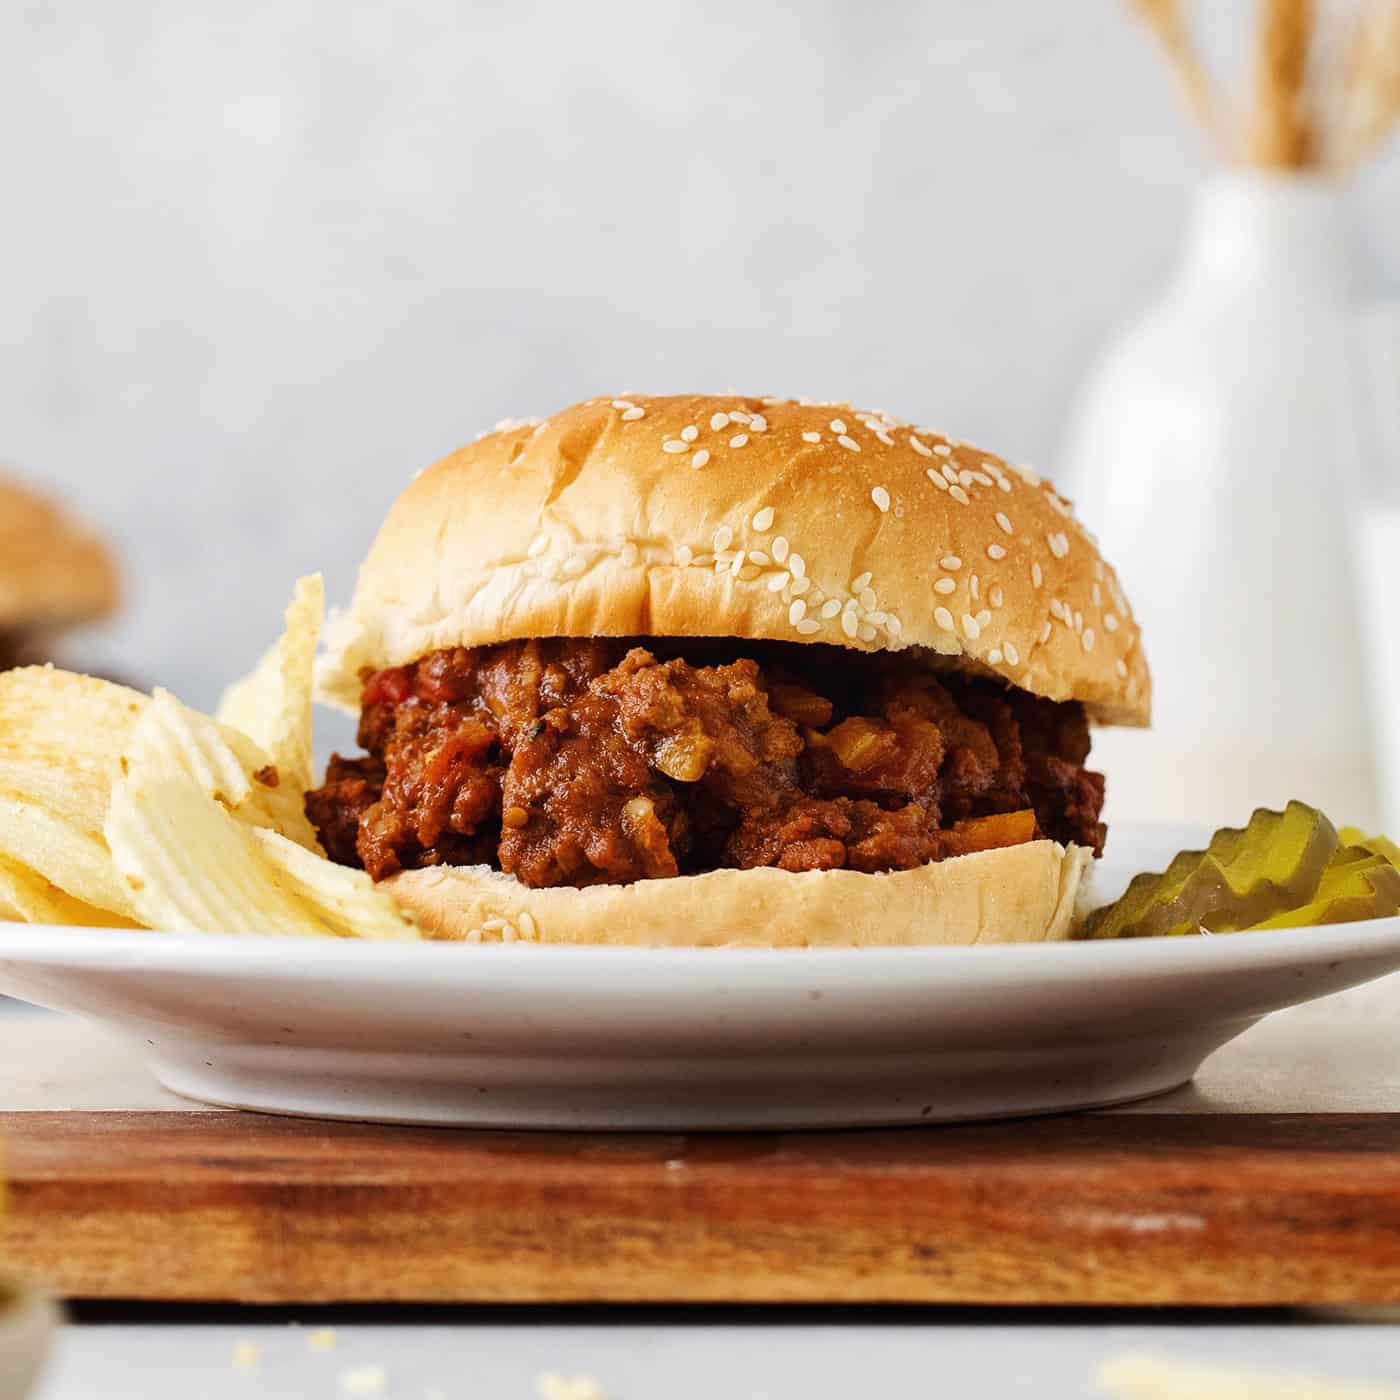 A sloppy joe sandwich on a plate with chips and pickles